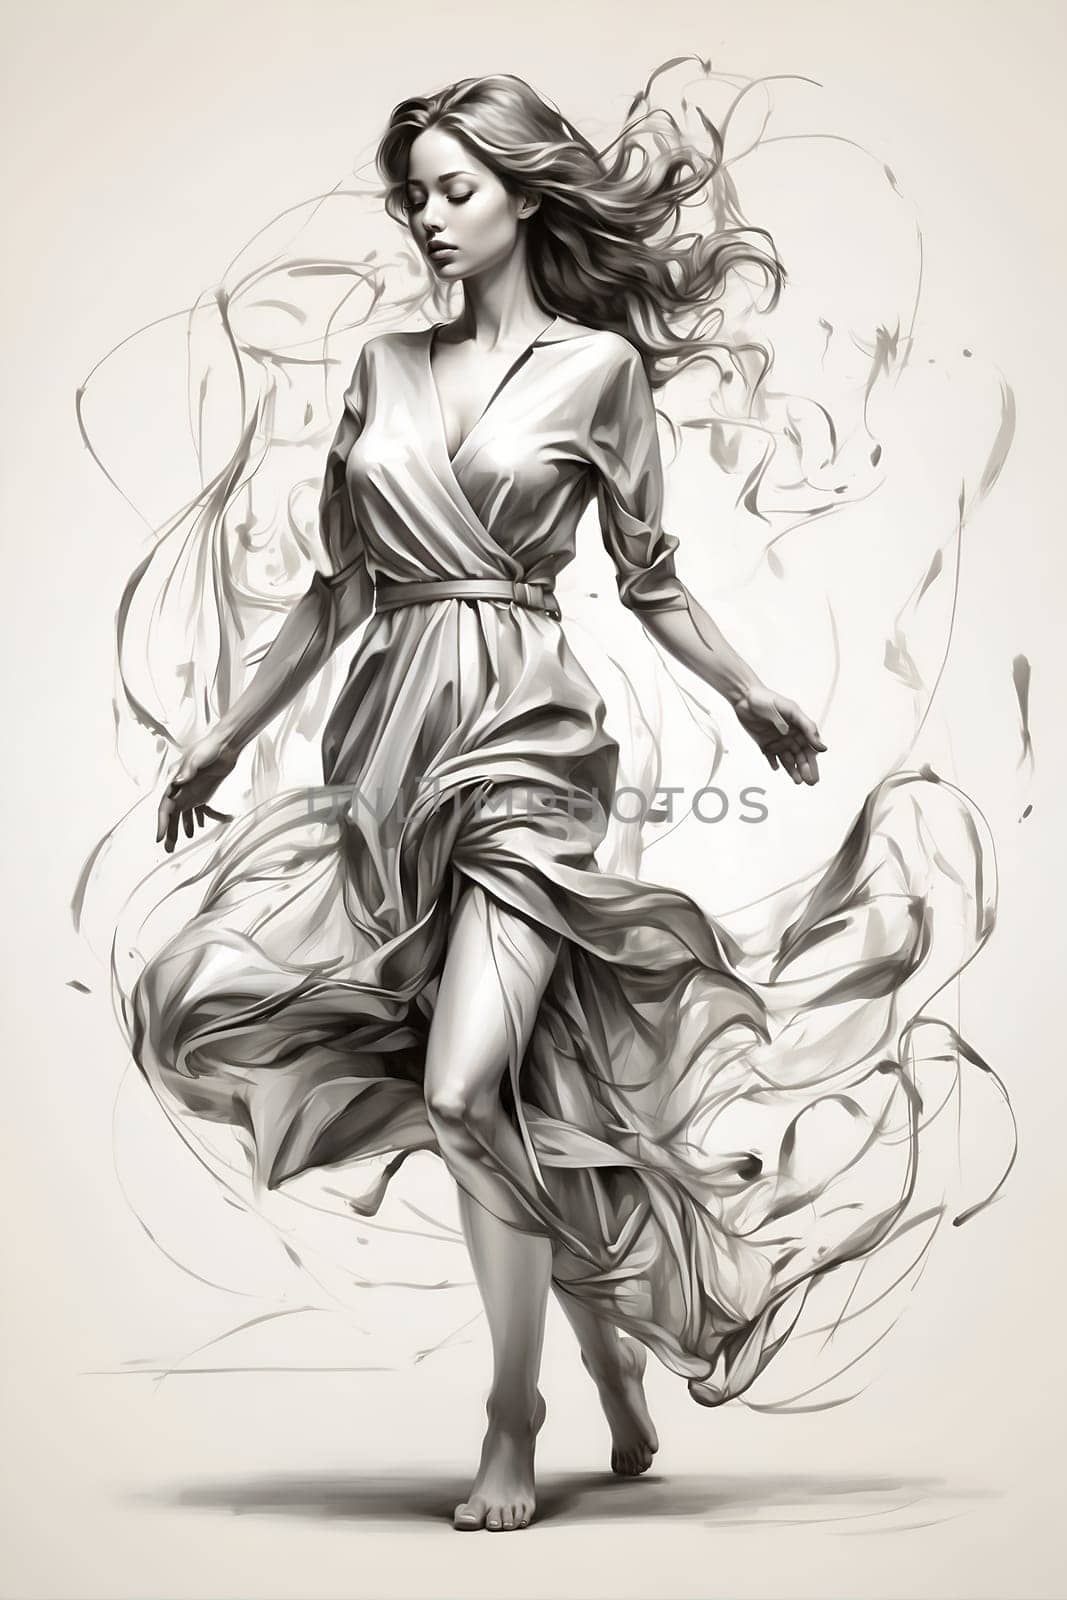 This is a detailed drawing of a woman wearing a flowing dress, capturing her elegant and graceful pose.